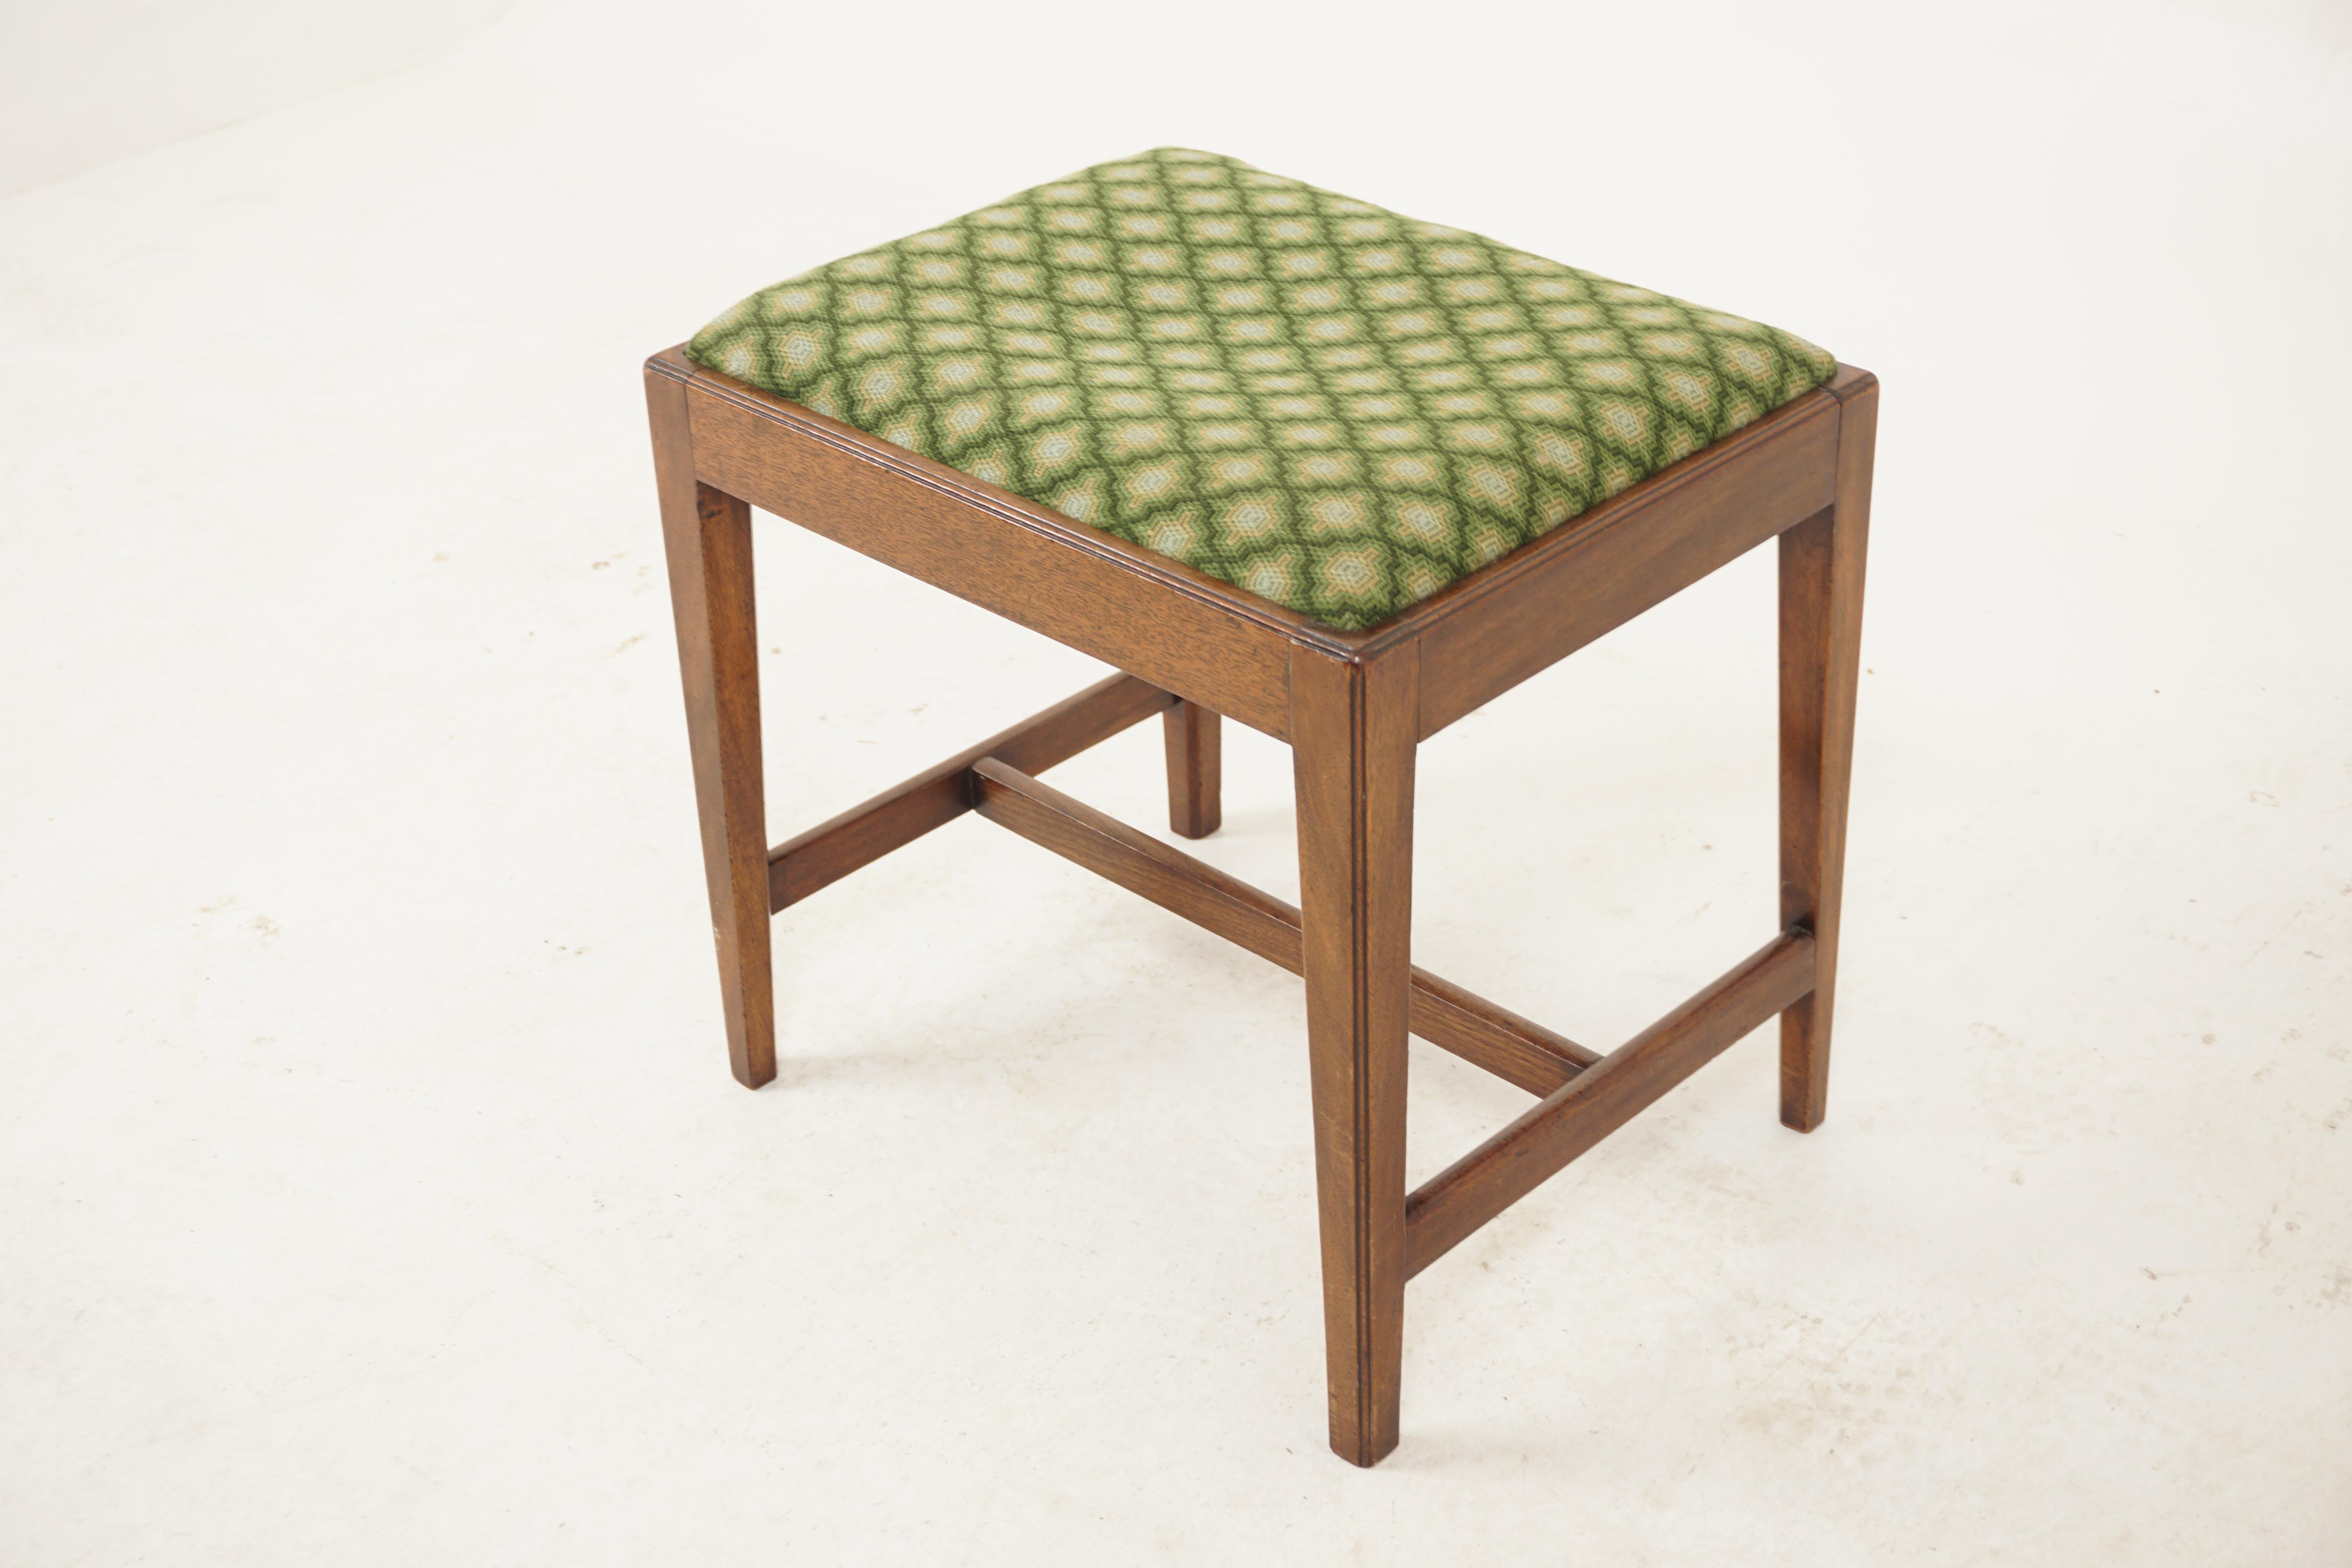 Vintage Walnut Dressing, Music, Fireside Stool, Footstool, Scotland 1930, H507

Scotland 1930
Solid Walnut
Original Finish
Rectangular  top with lift out upholstered seat
Standing on four square tapering legs
All connected by an H stretcher